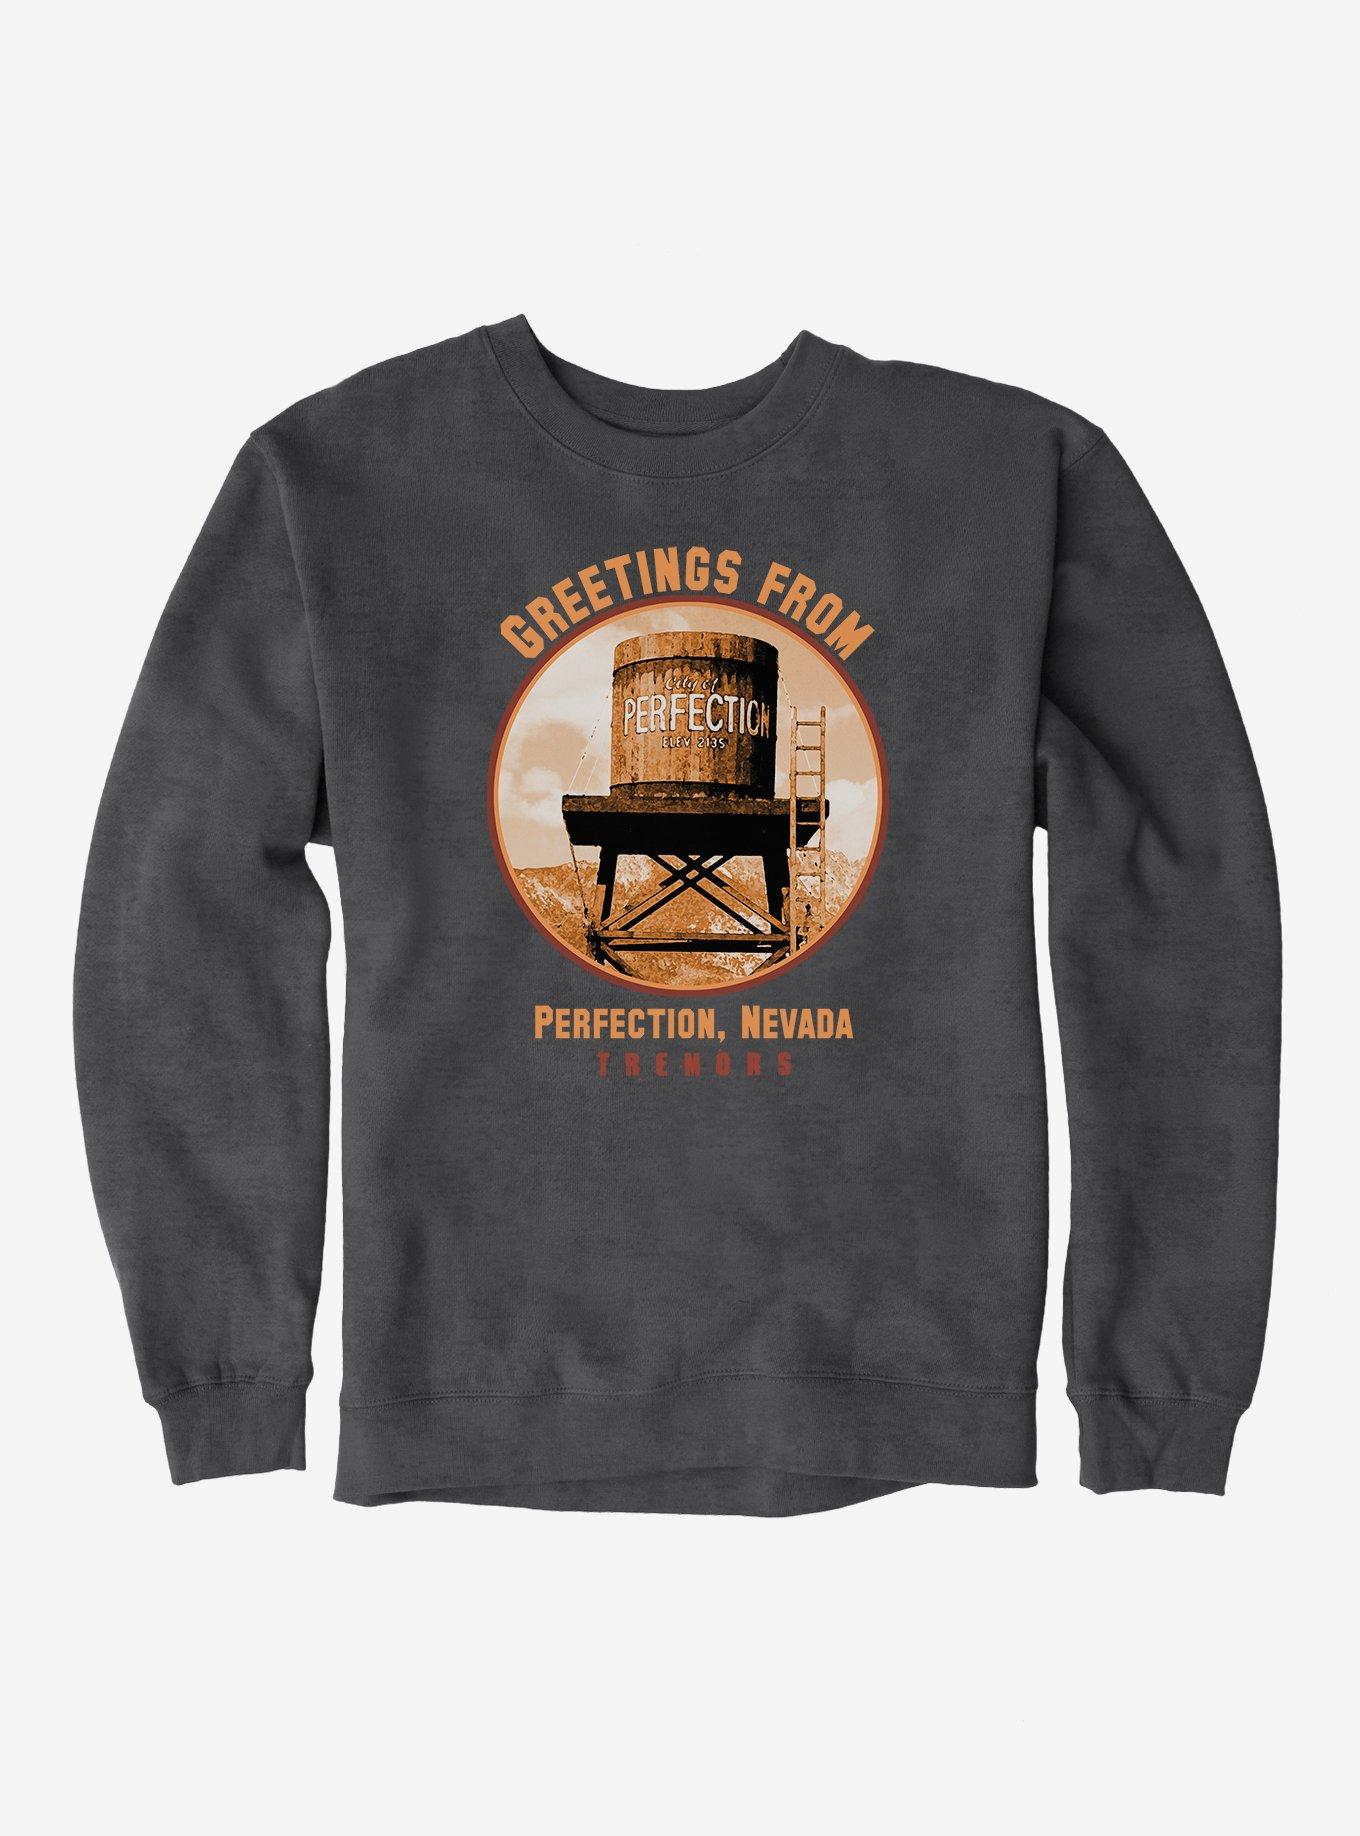 Tremors Greetings From Perfection Sweatshirt